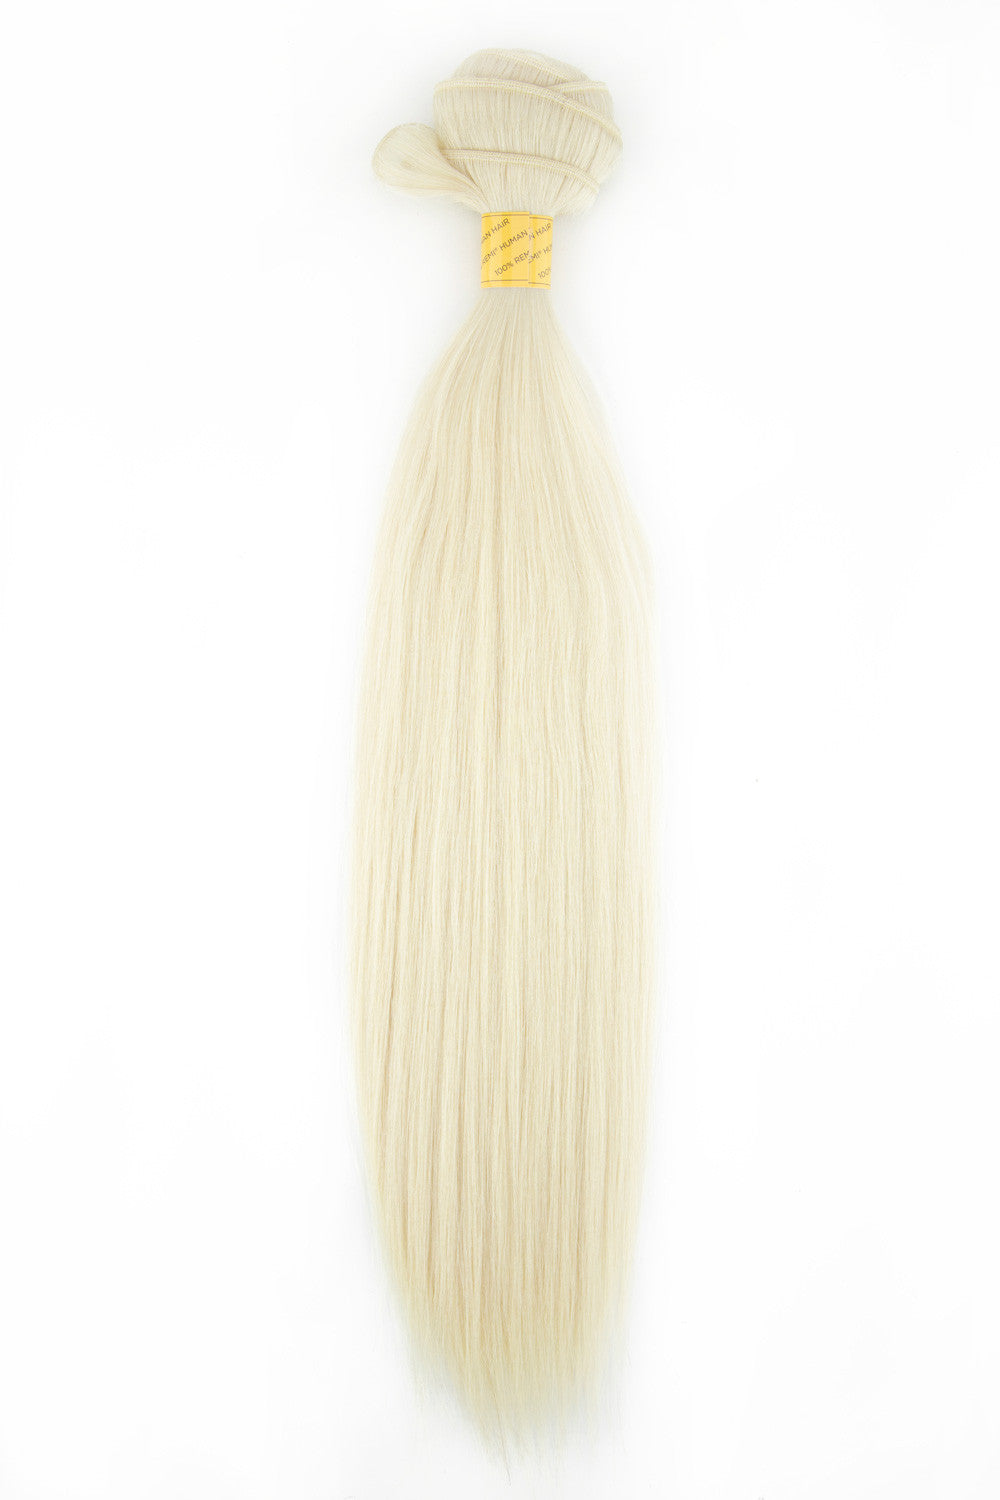 Luxe Machine-Tied Silky Straight 18"